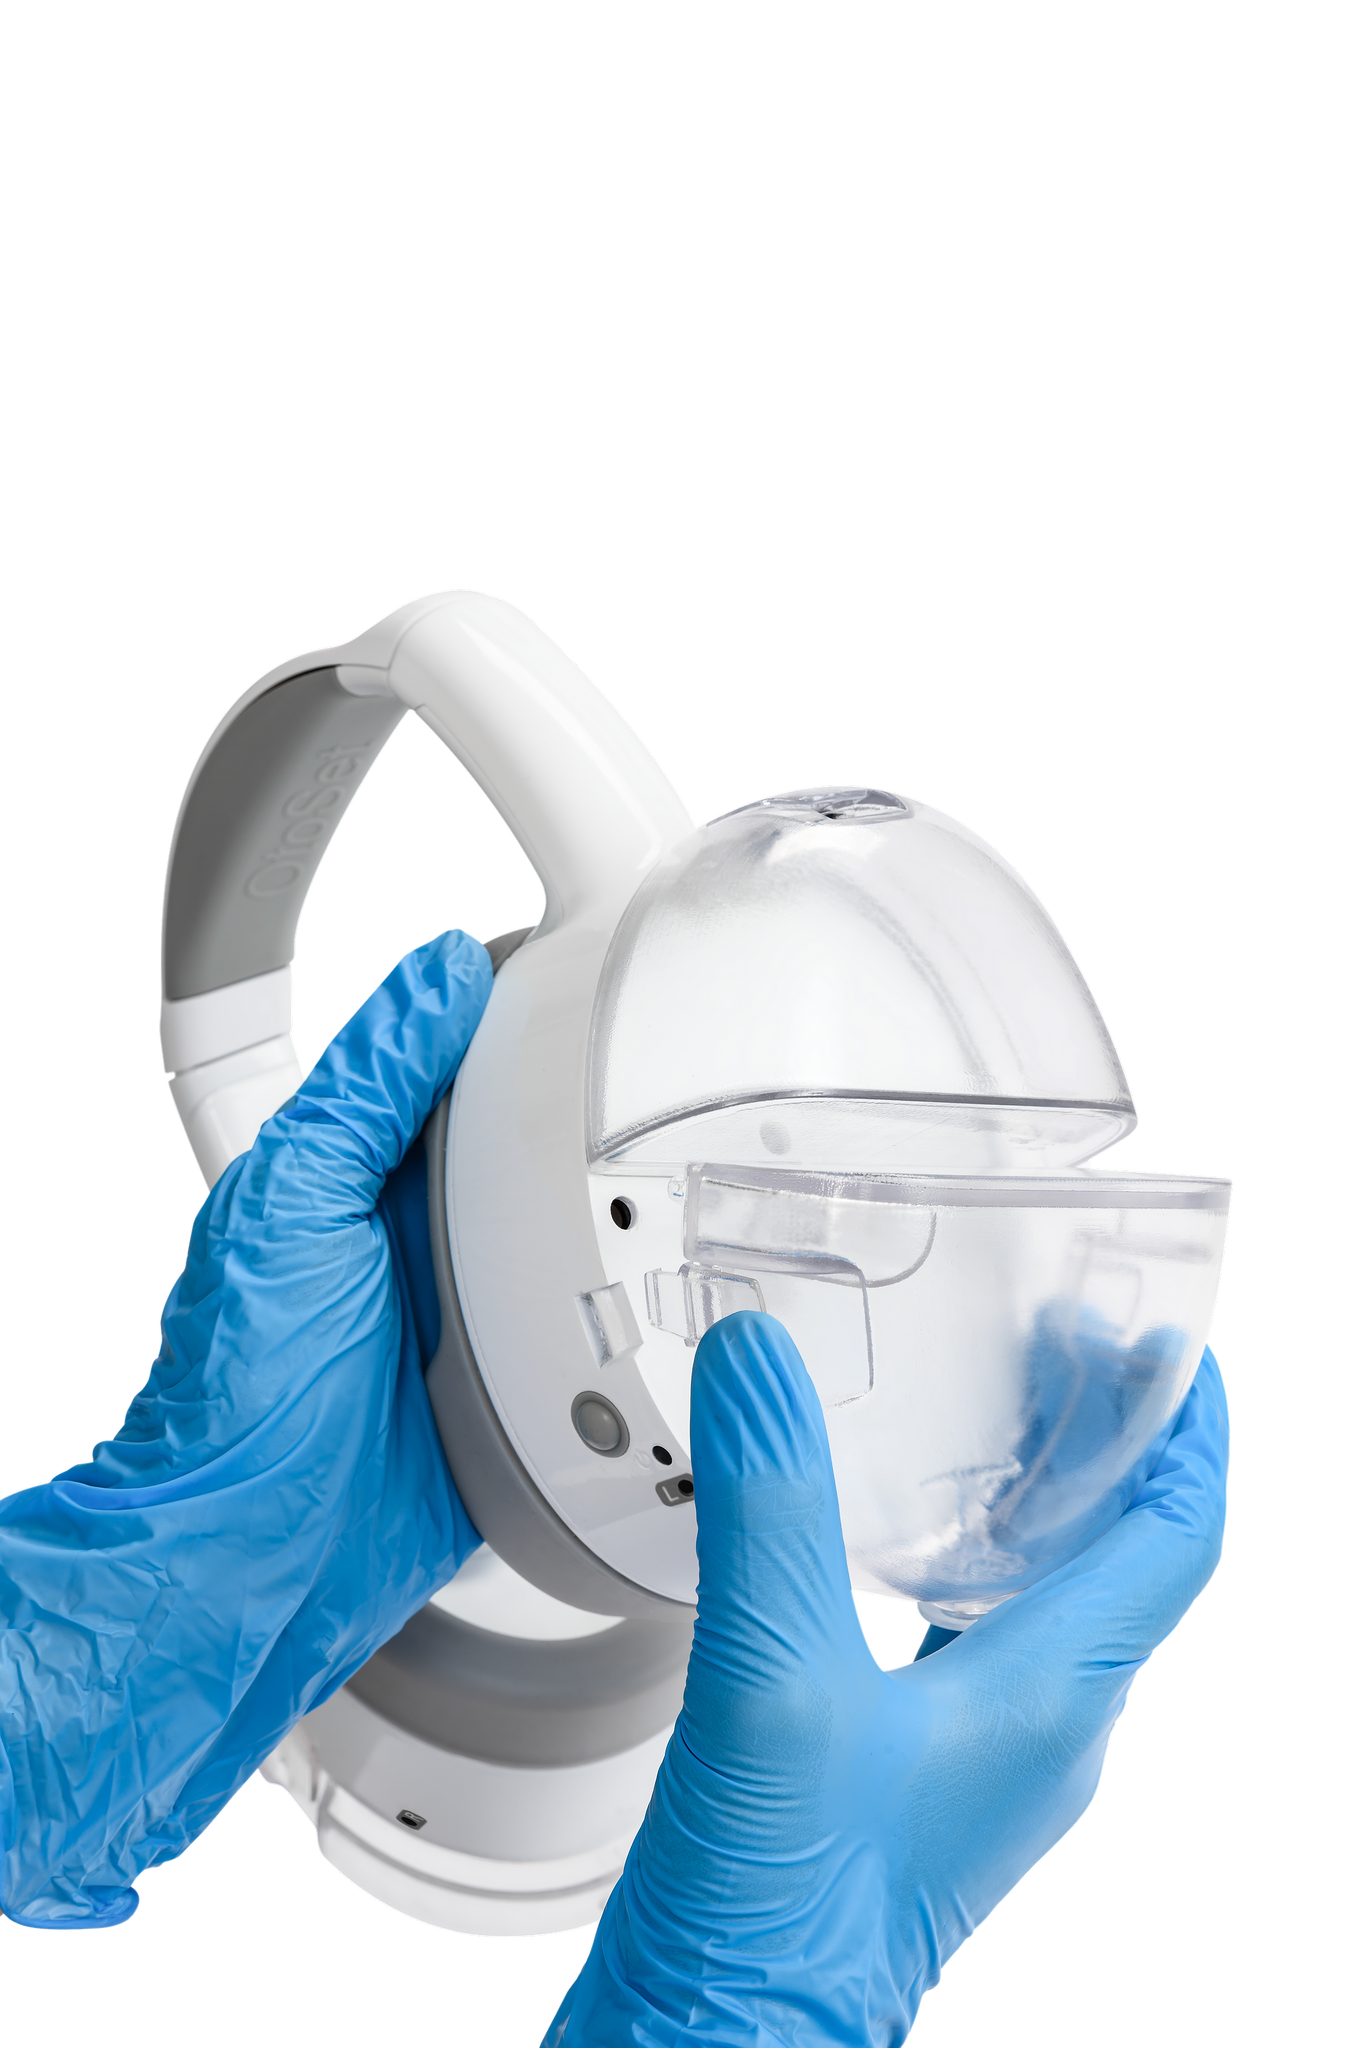 SafKan Health Launches OtoSet Ear Cleaning Device